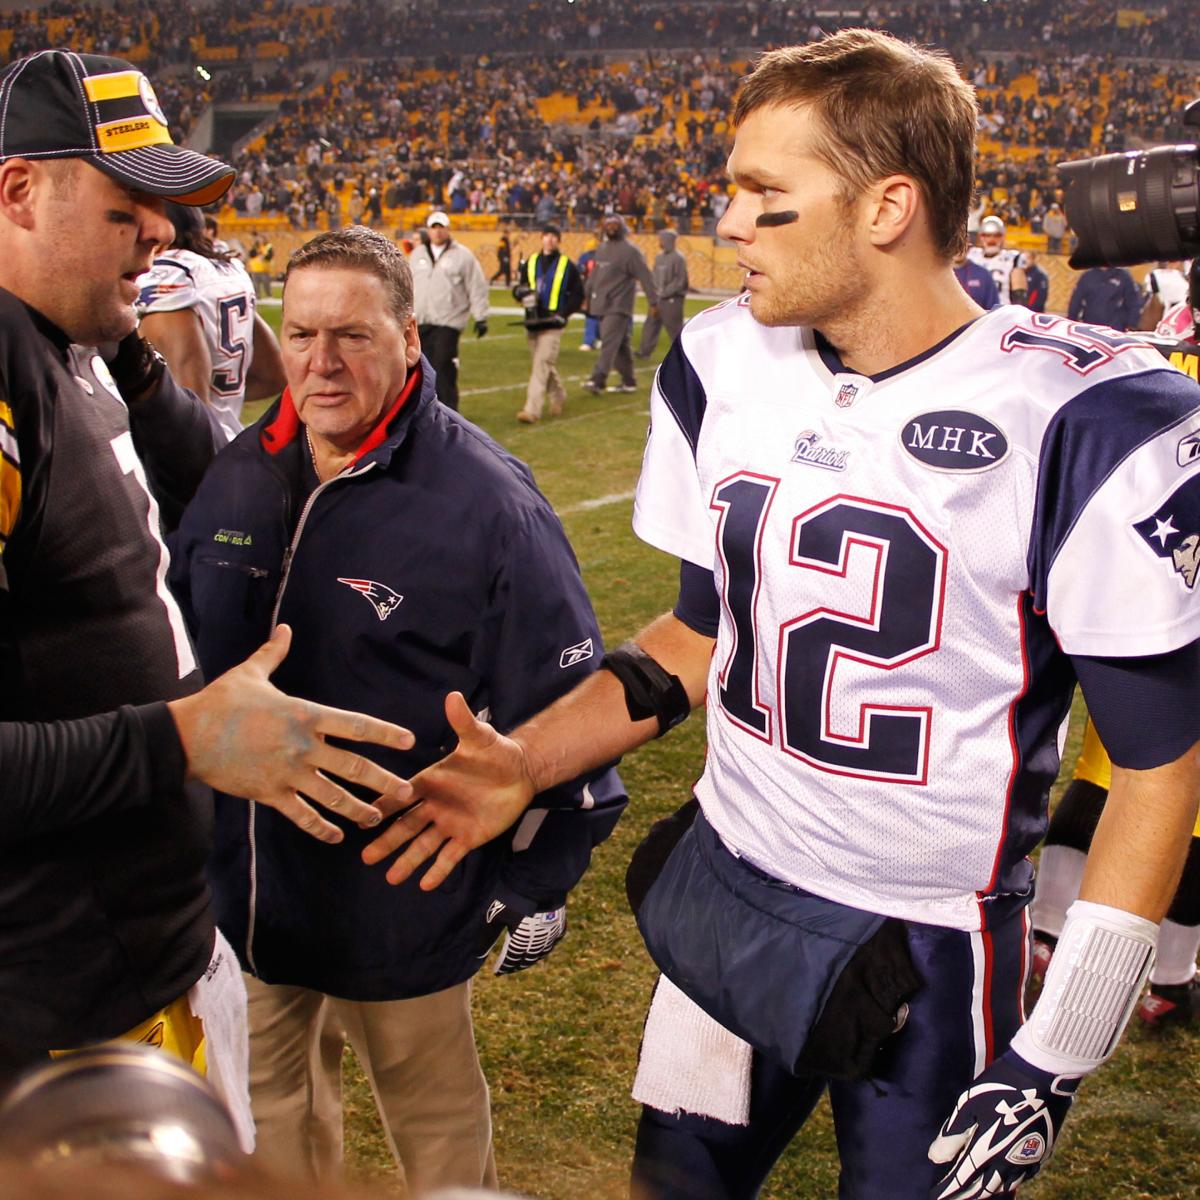 The Patriots and Steelers are ready to reboot their rivalry